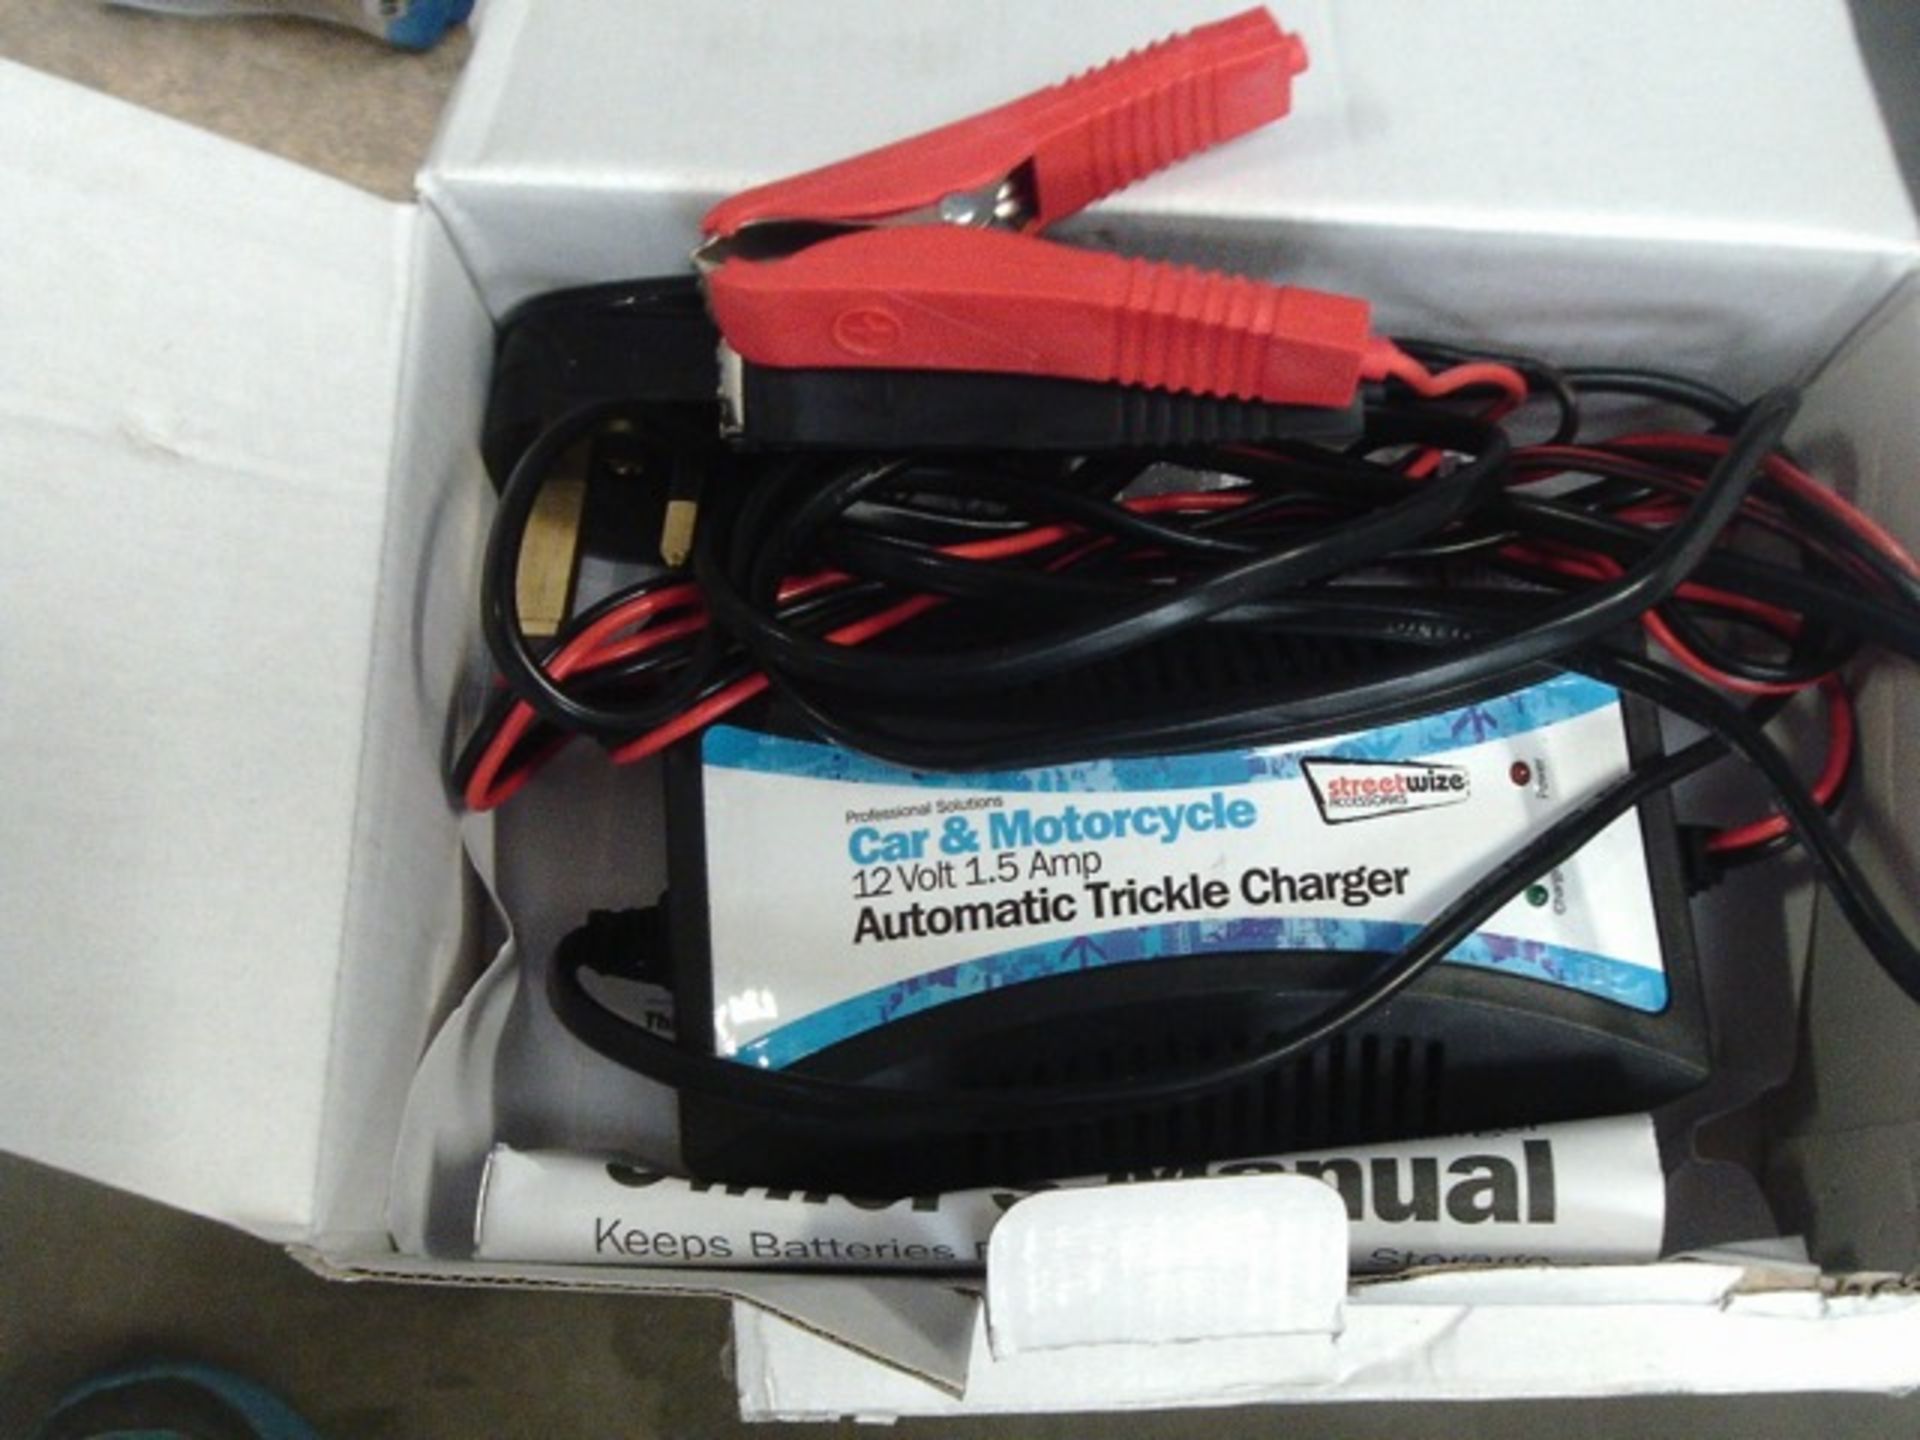 5pcs x Streetwise 12Volt 1.5Amp Auctomatic trickle charger - rrp 19.99 each ( there are 5 items in - Image 5 of 5